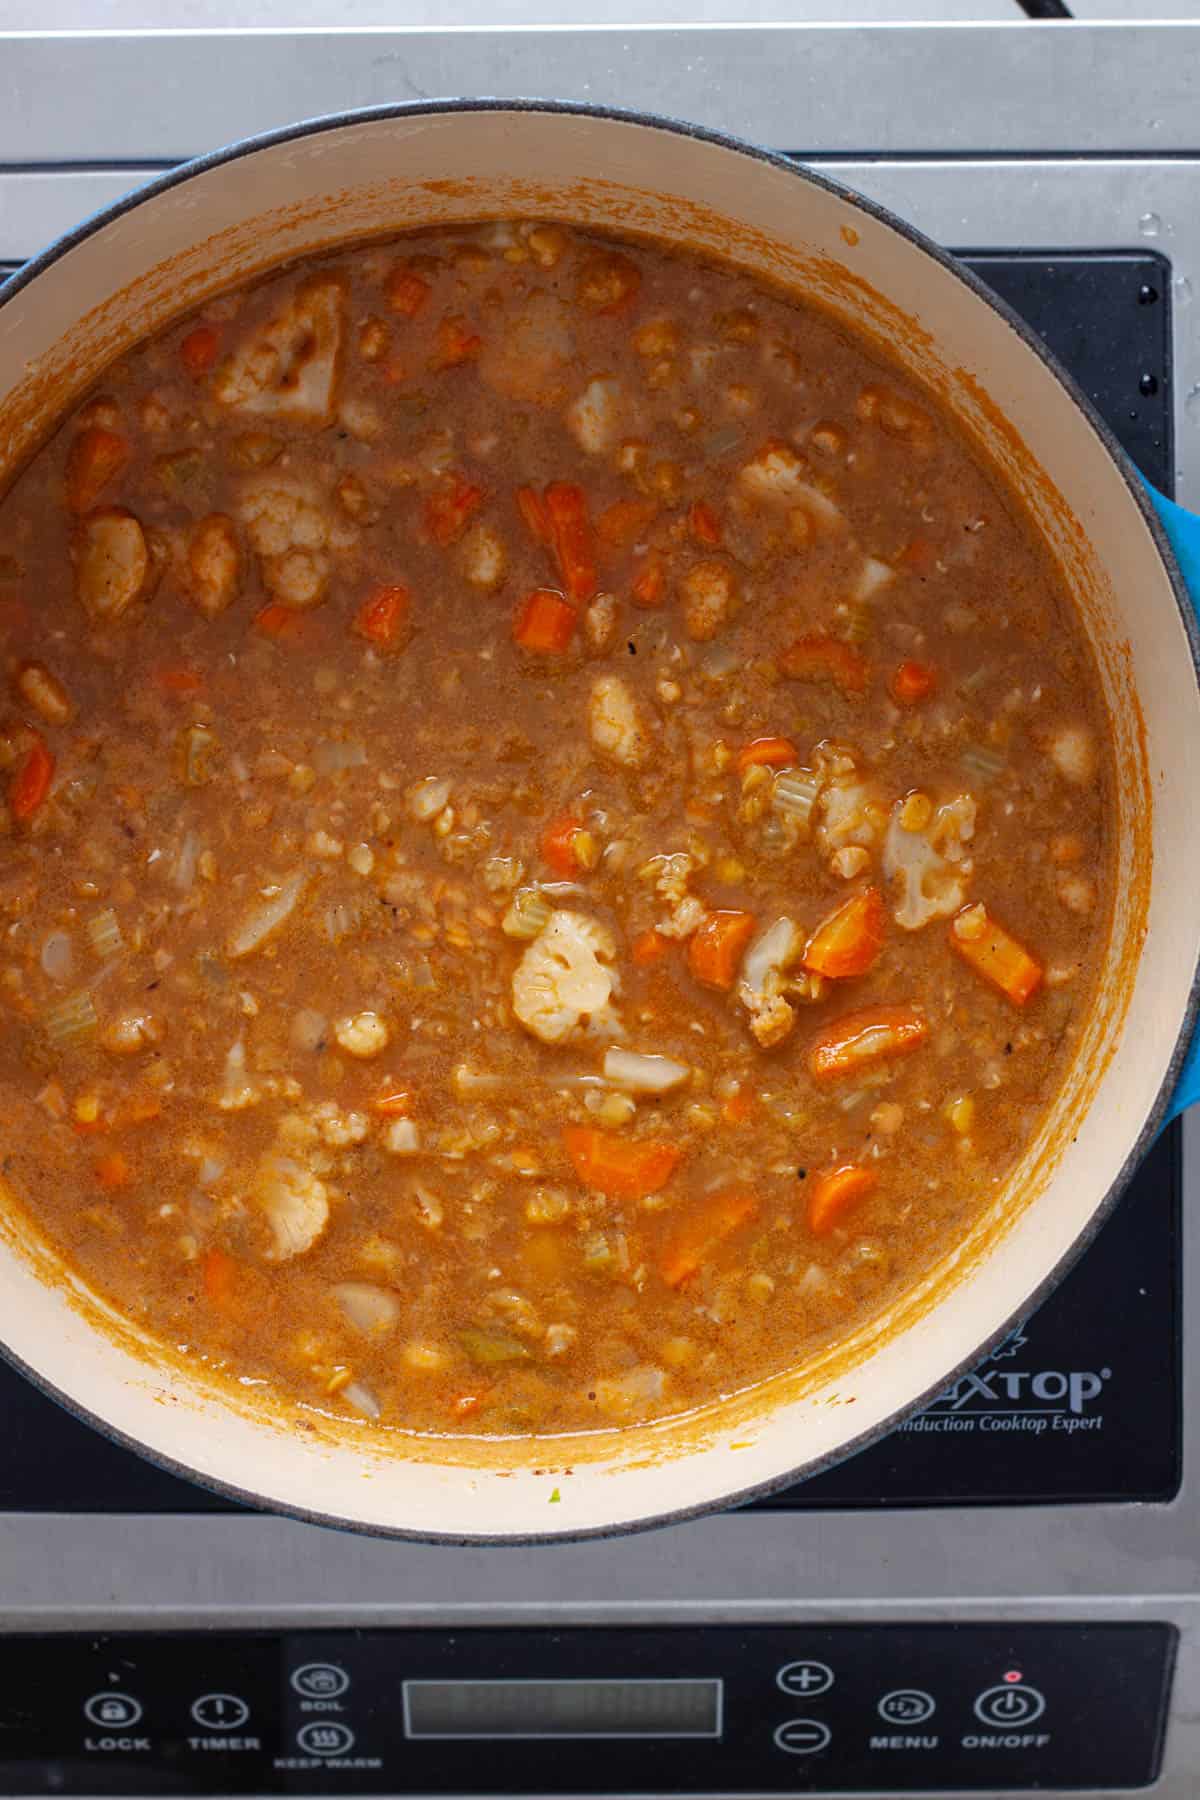 A homemade lentil soup with cauliflower and other vegetables in a Dutch oven.